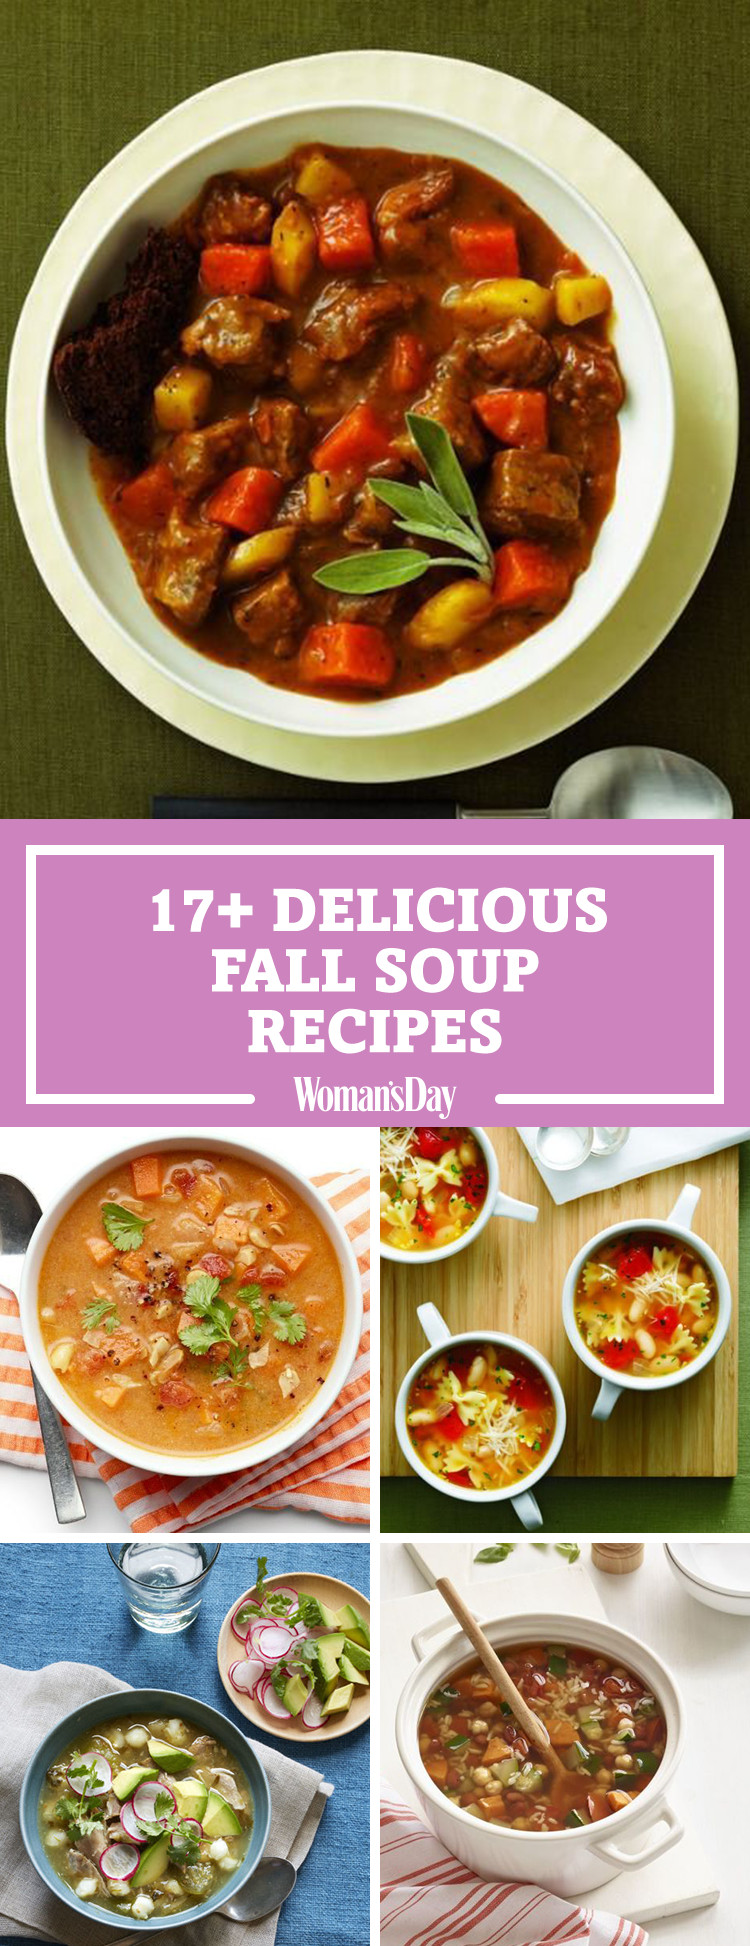 Fall Soup And Stew Recipes
 22 Best Fall Soup Recipes Easy and Hearty Autumn Soups